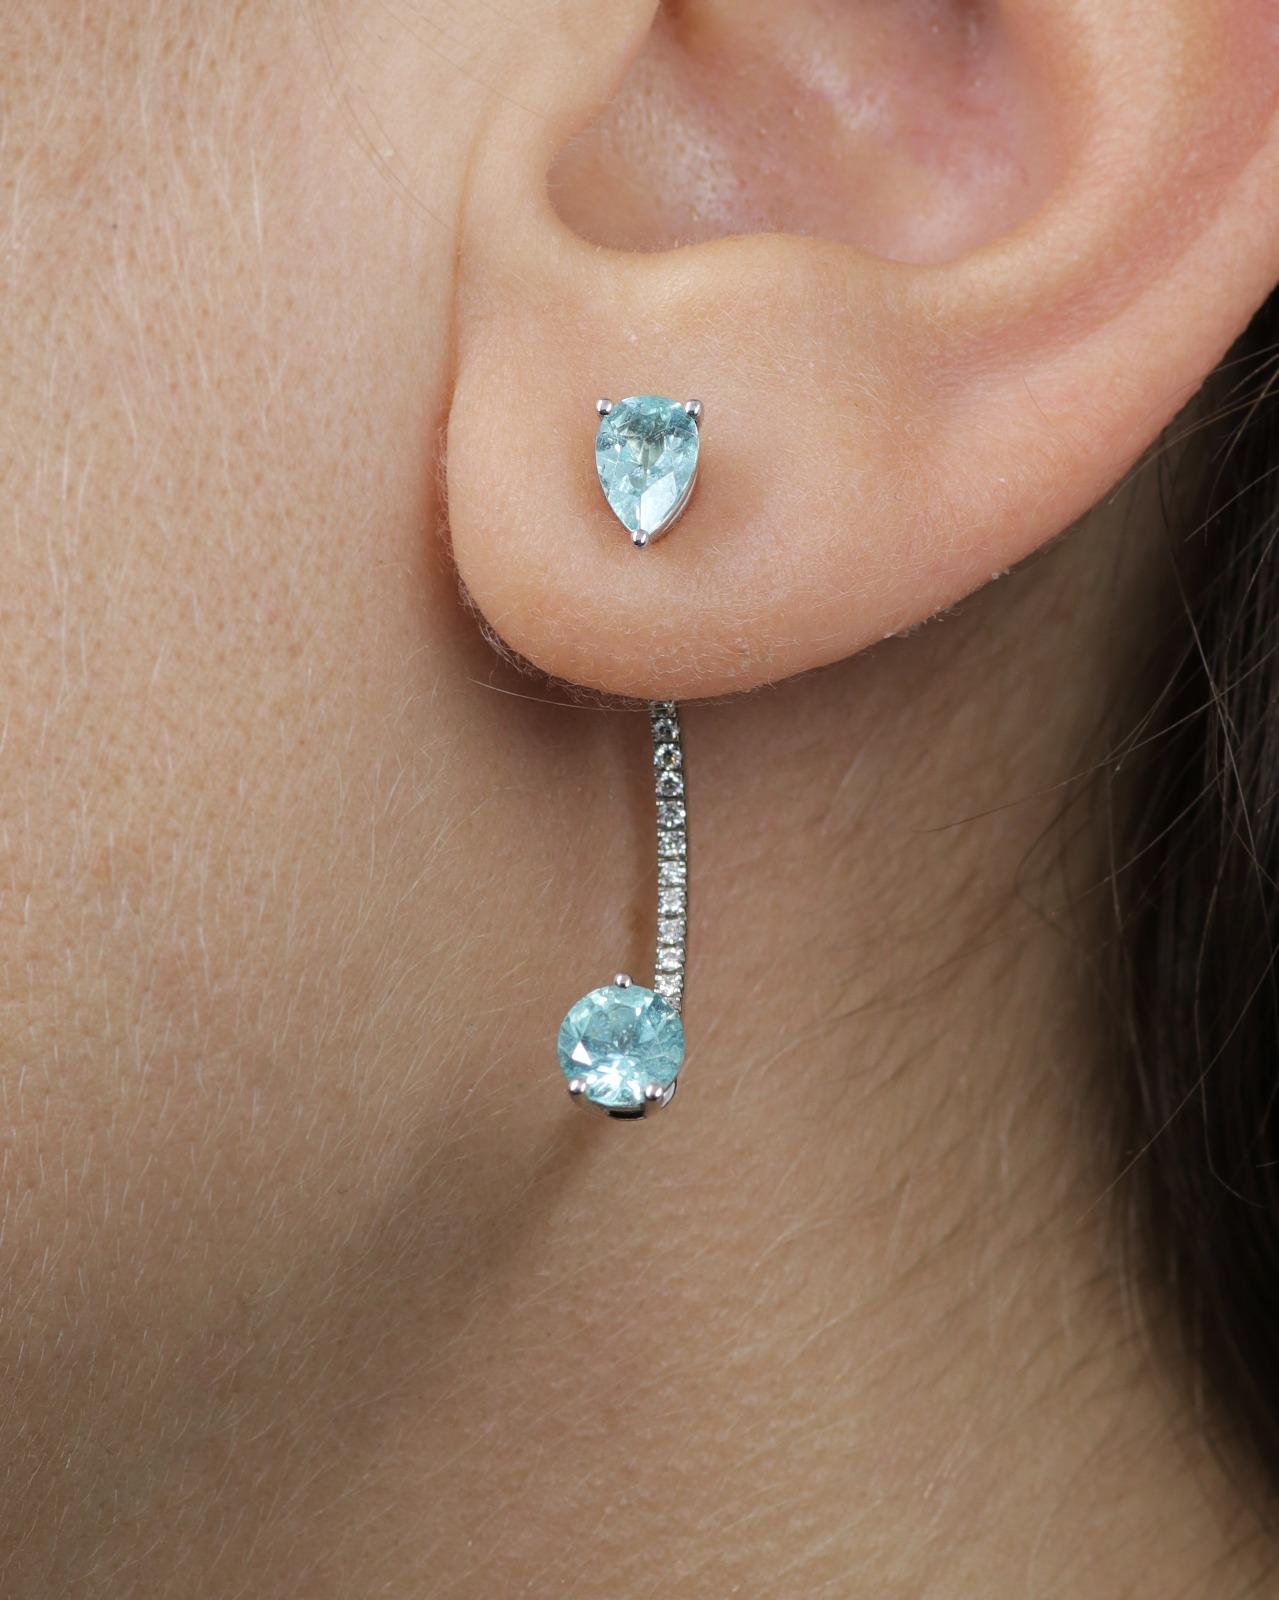 These one of a kind Paraiba drop earrings designed by Italian jeweller Delfina Delettrez are handcrafted in her roman atelier from 18 karat white gold 4,83 gr and feature a curved band embellished with channel set of white diamonds 0.20 ct and